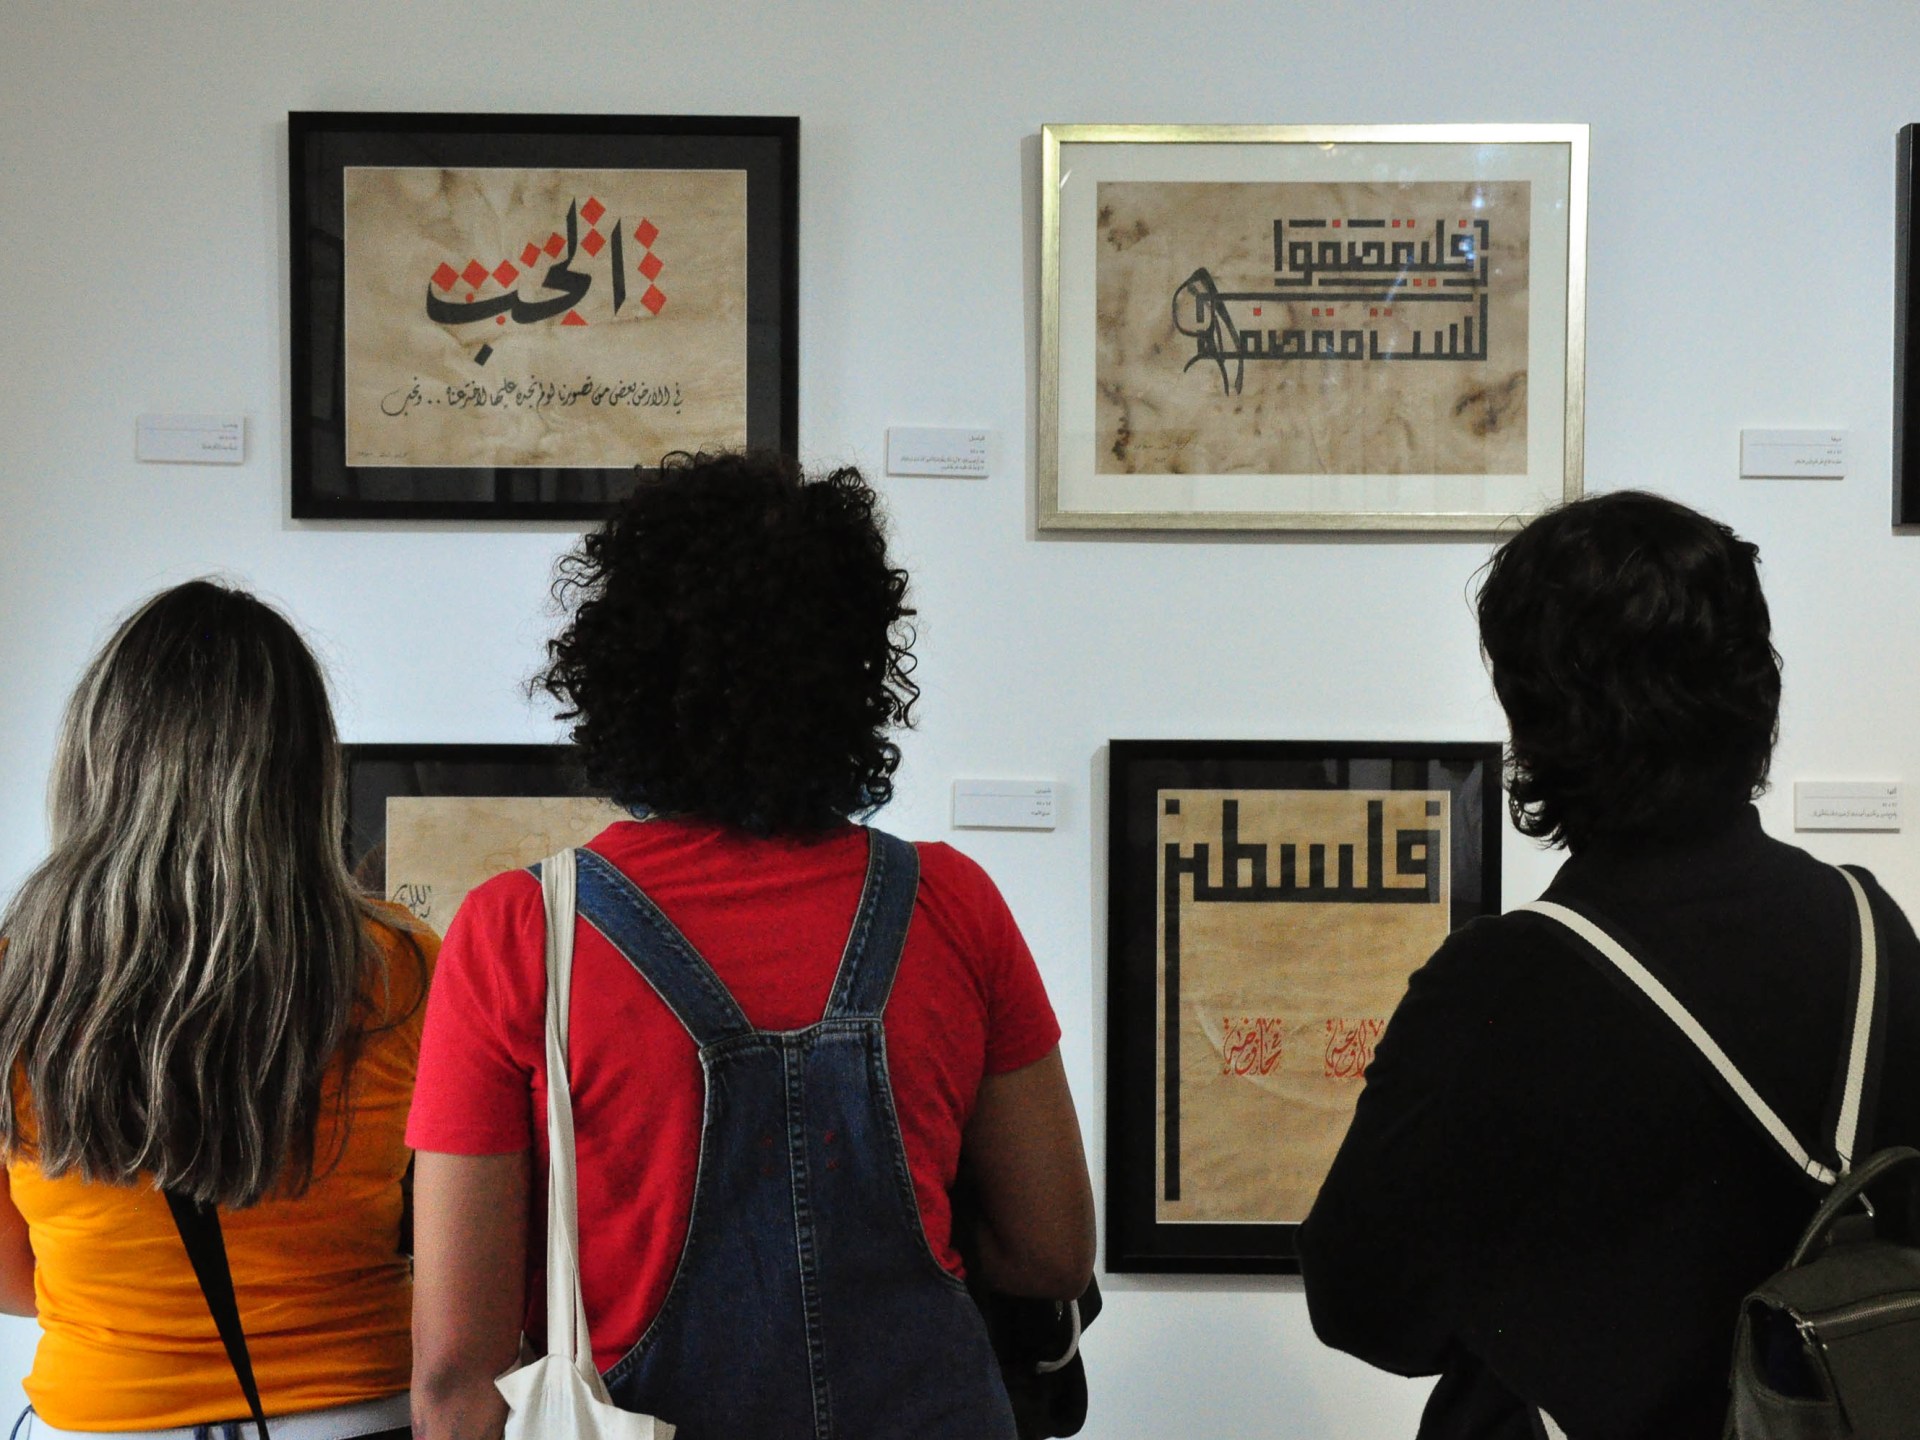 Photos: Art smuggled out of Israeli prison displayed in Ramallah